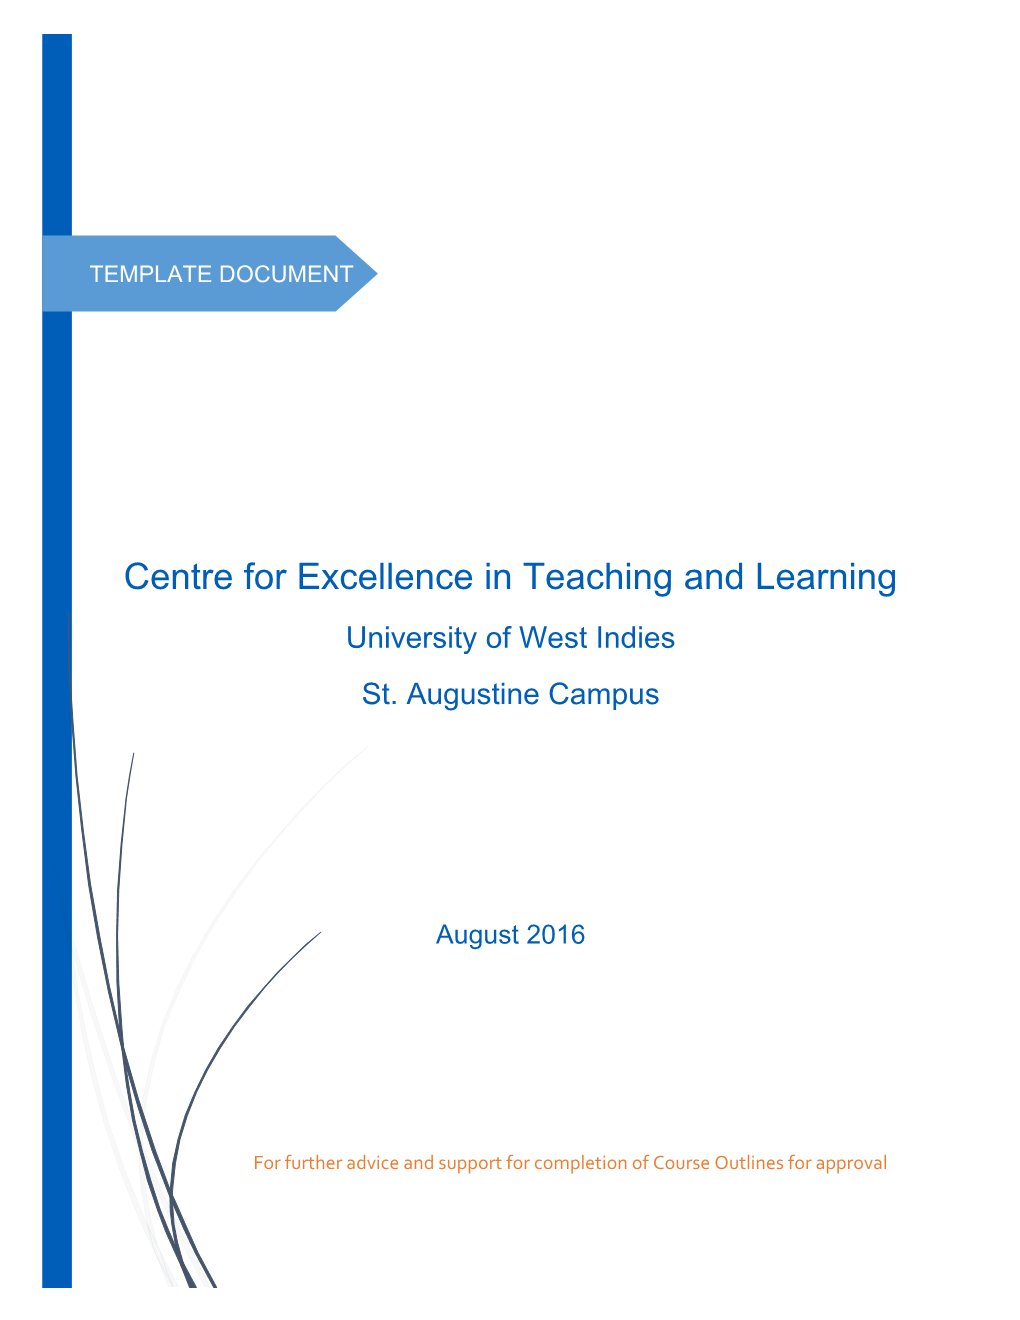 Centre for Excellence in Teaching and Learning